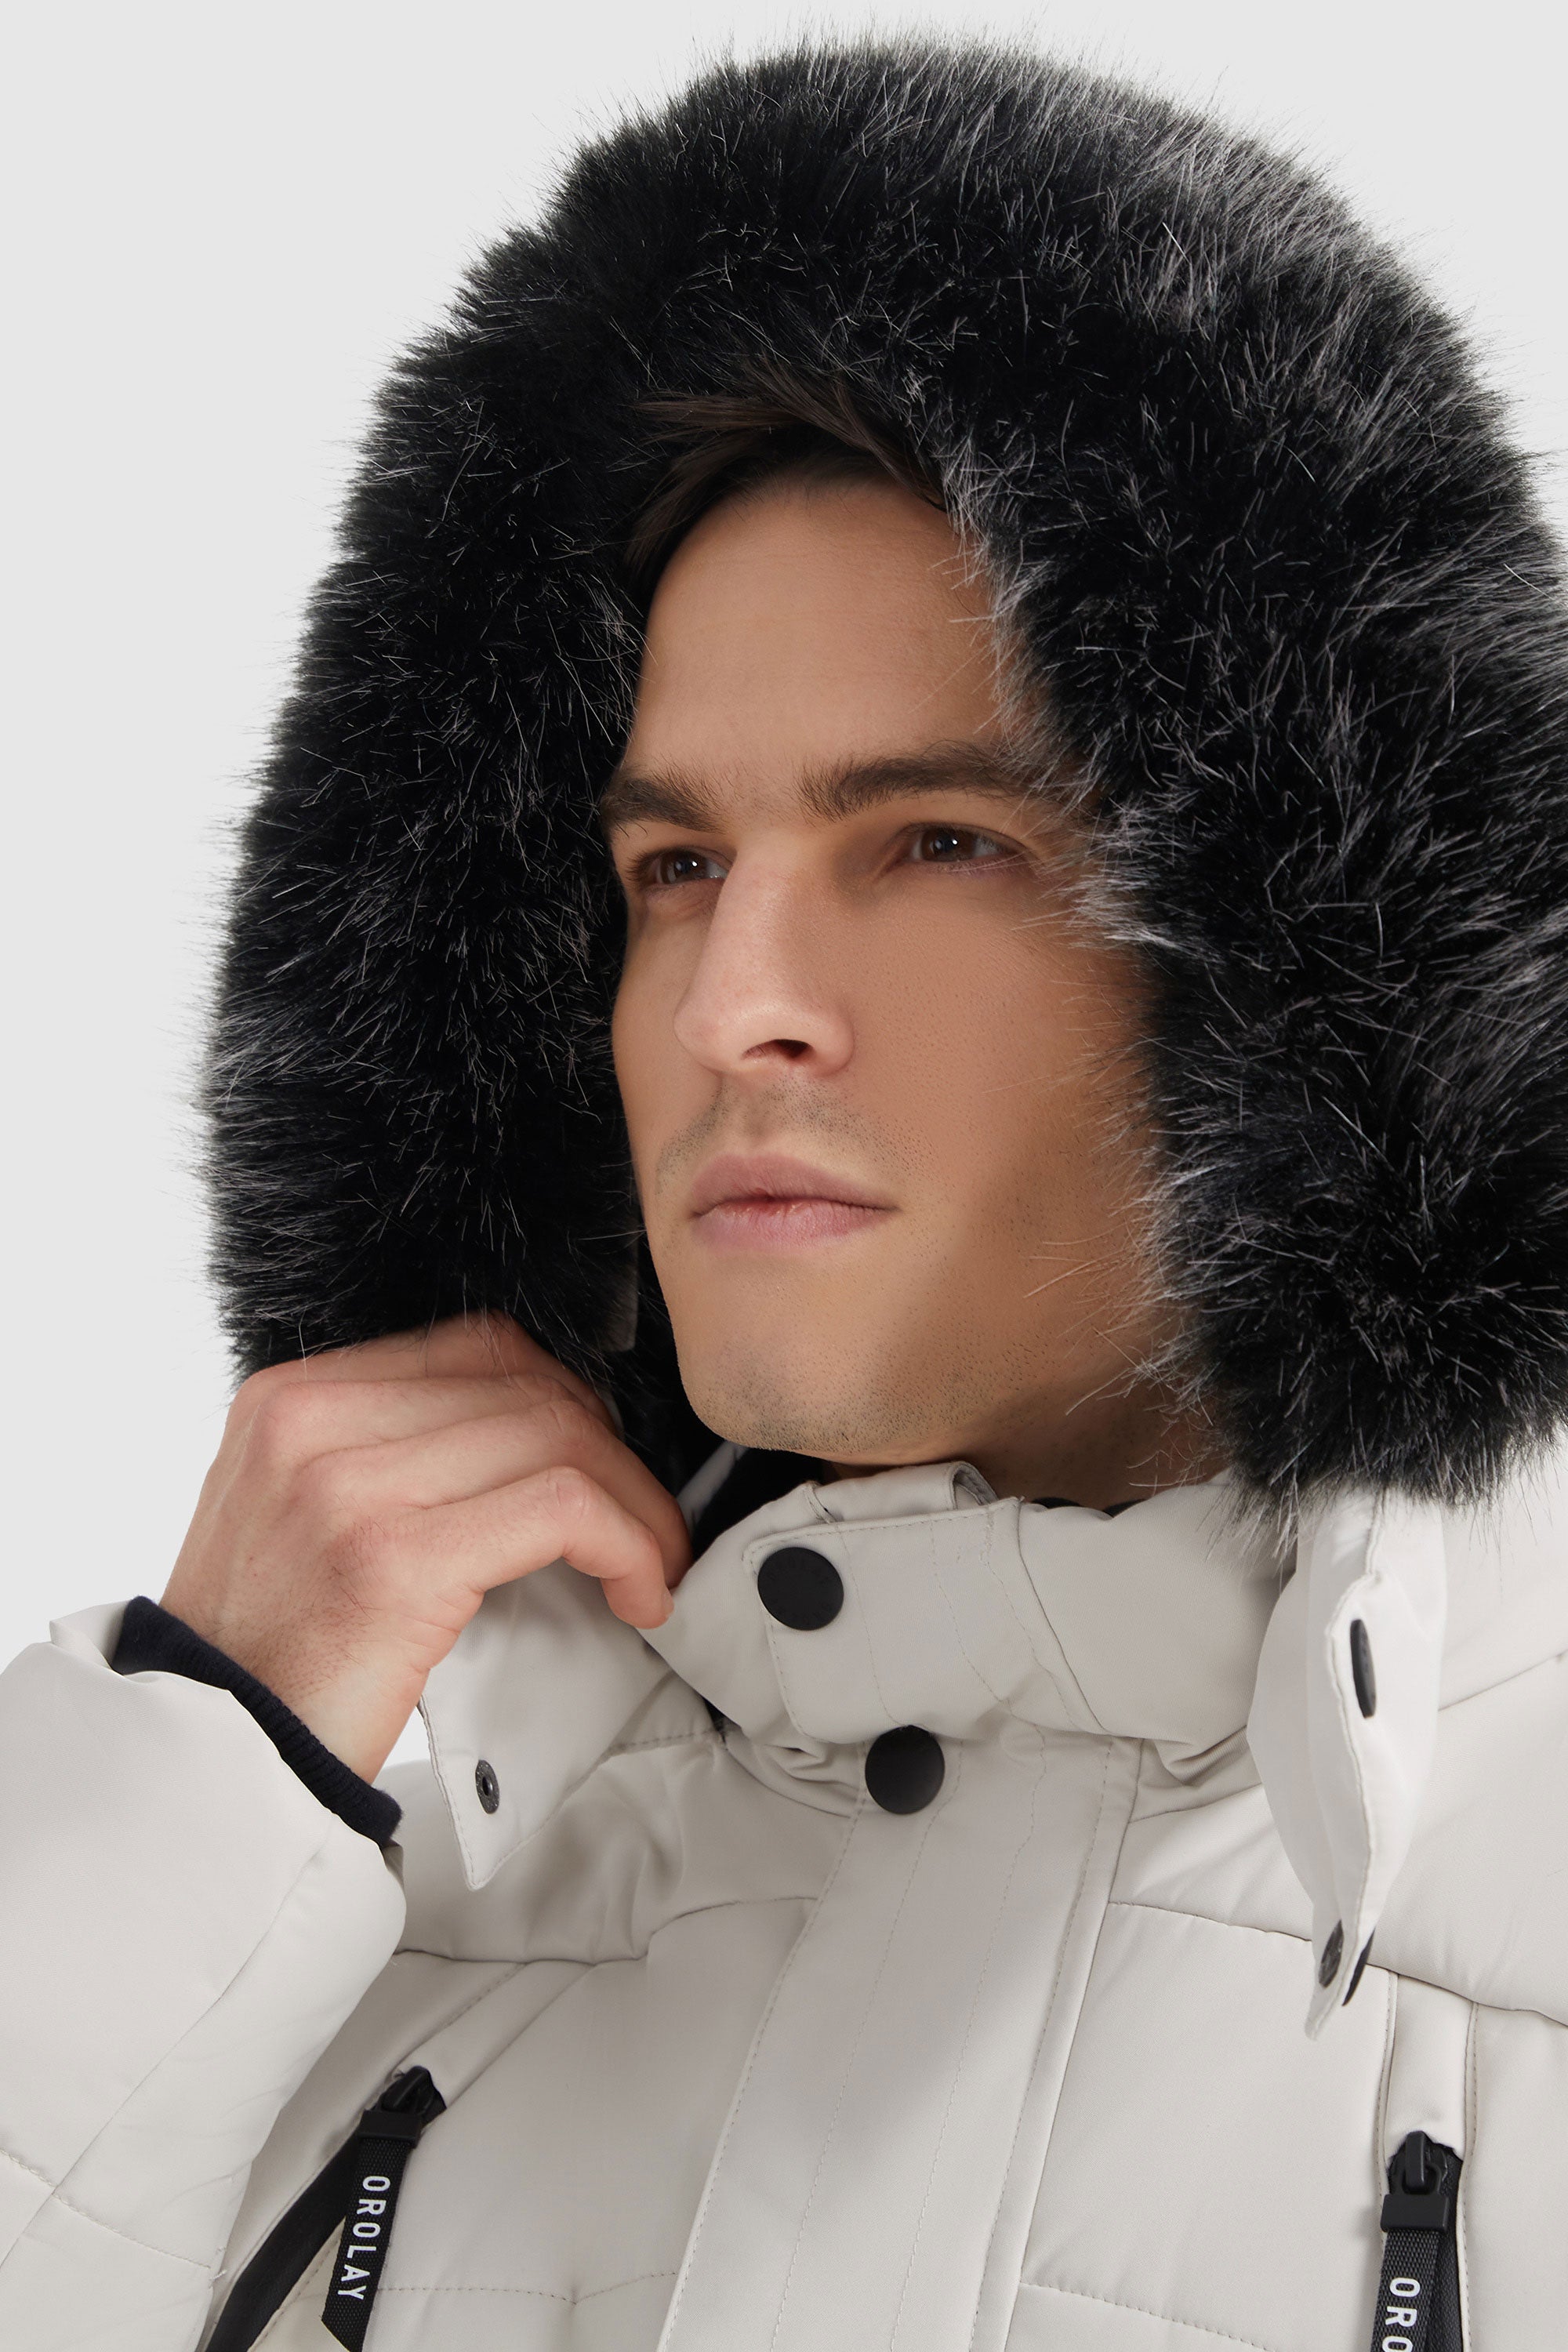 Hooded Mountain Parka with Faux Fur